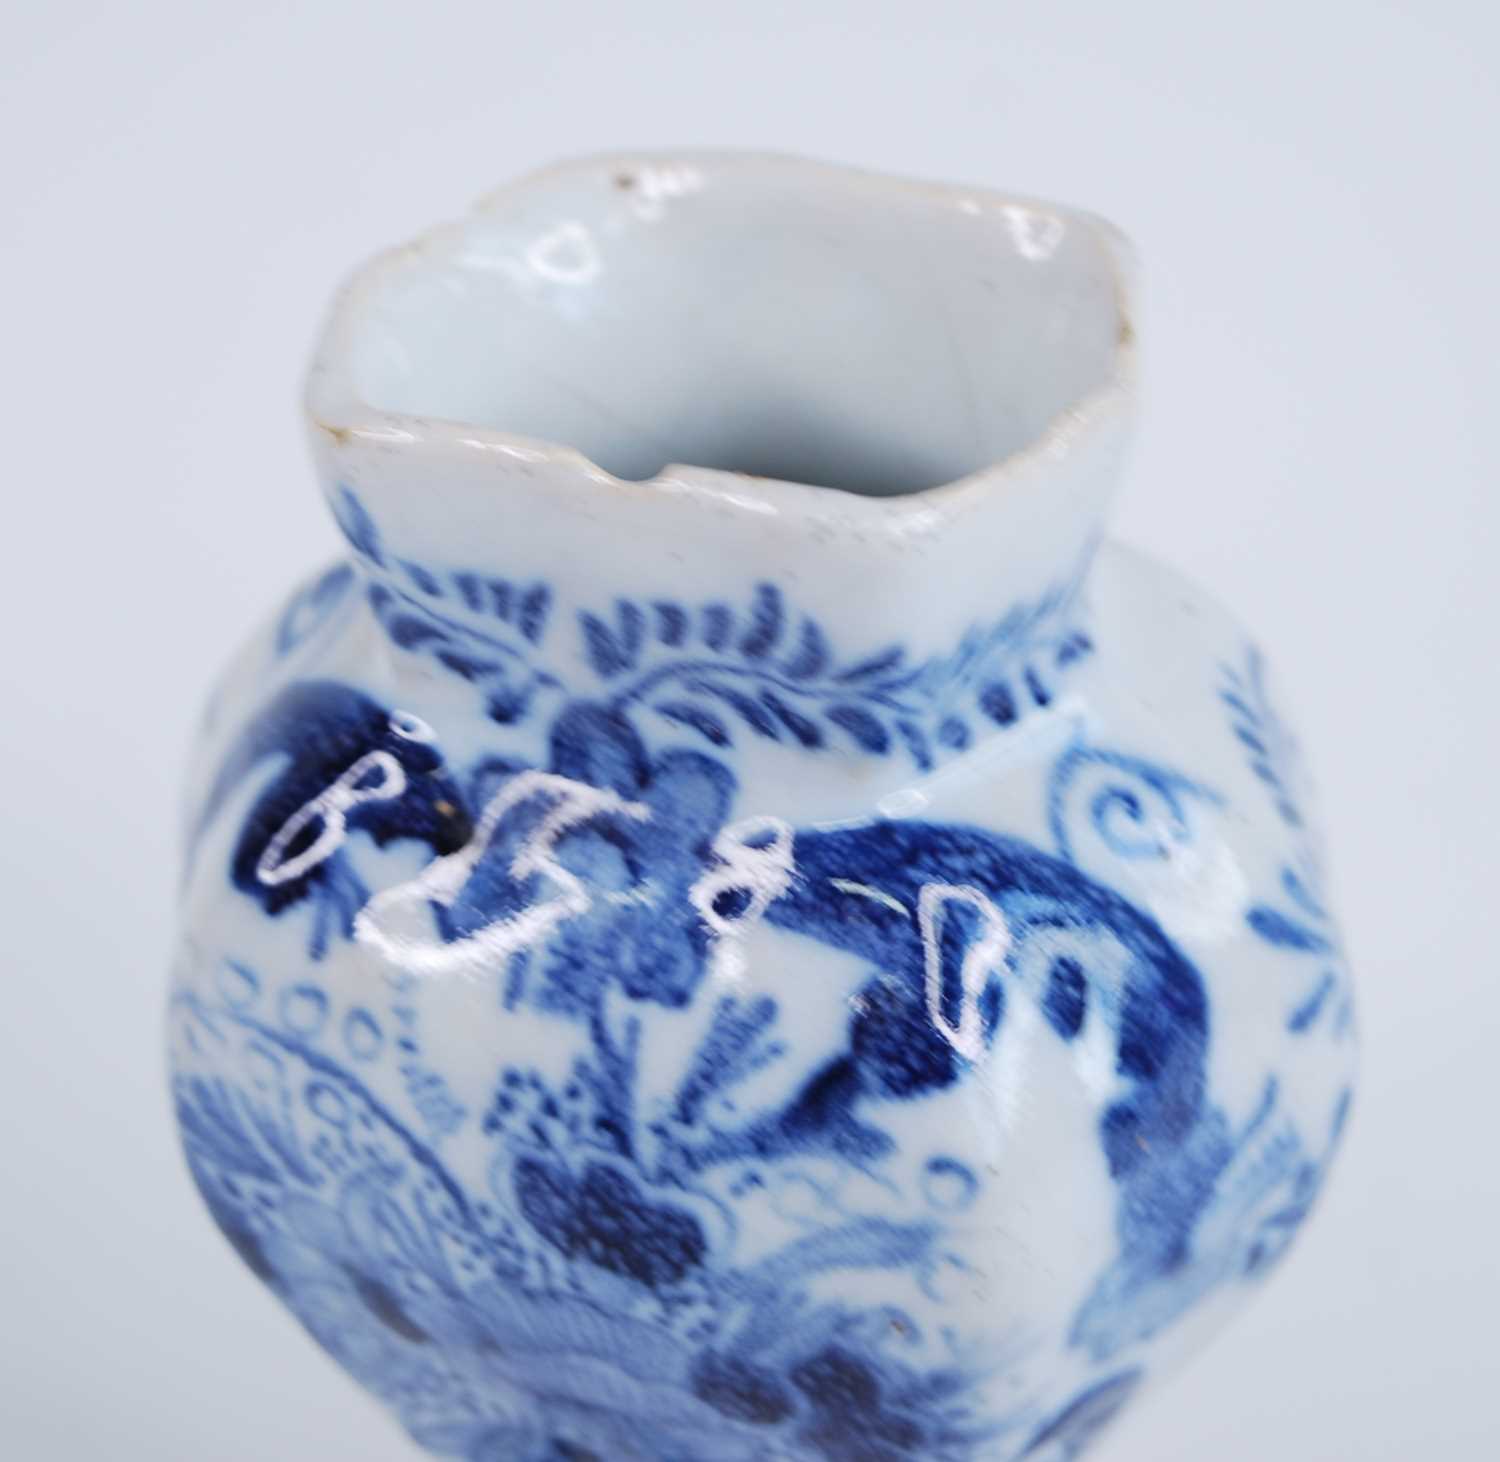 A Delft blue and white vase, 18th century, the garlic neck above a globular body, decorated with - Image 7 of 9